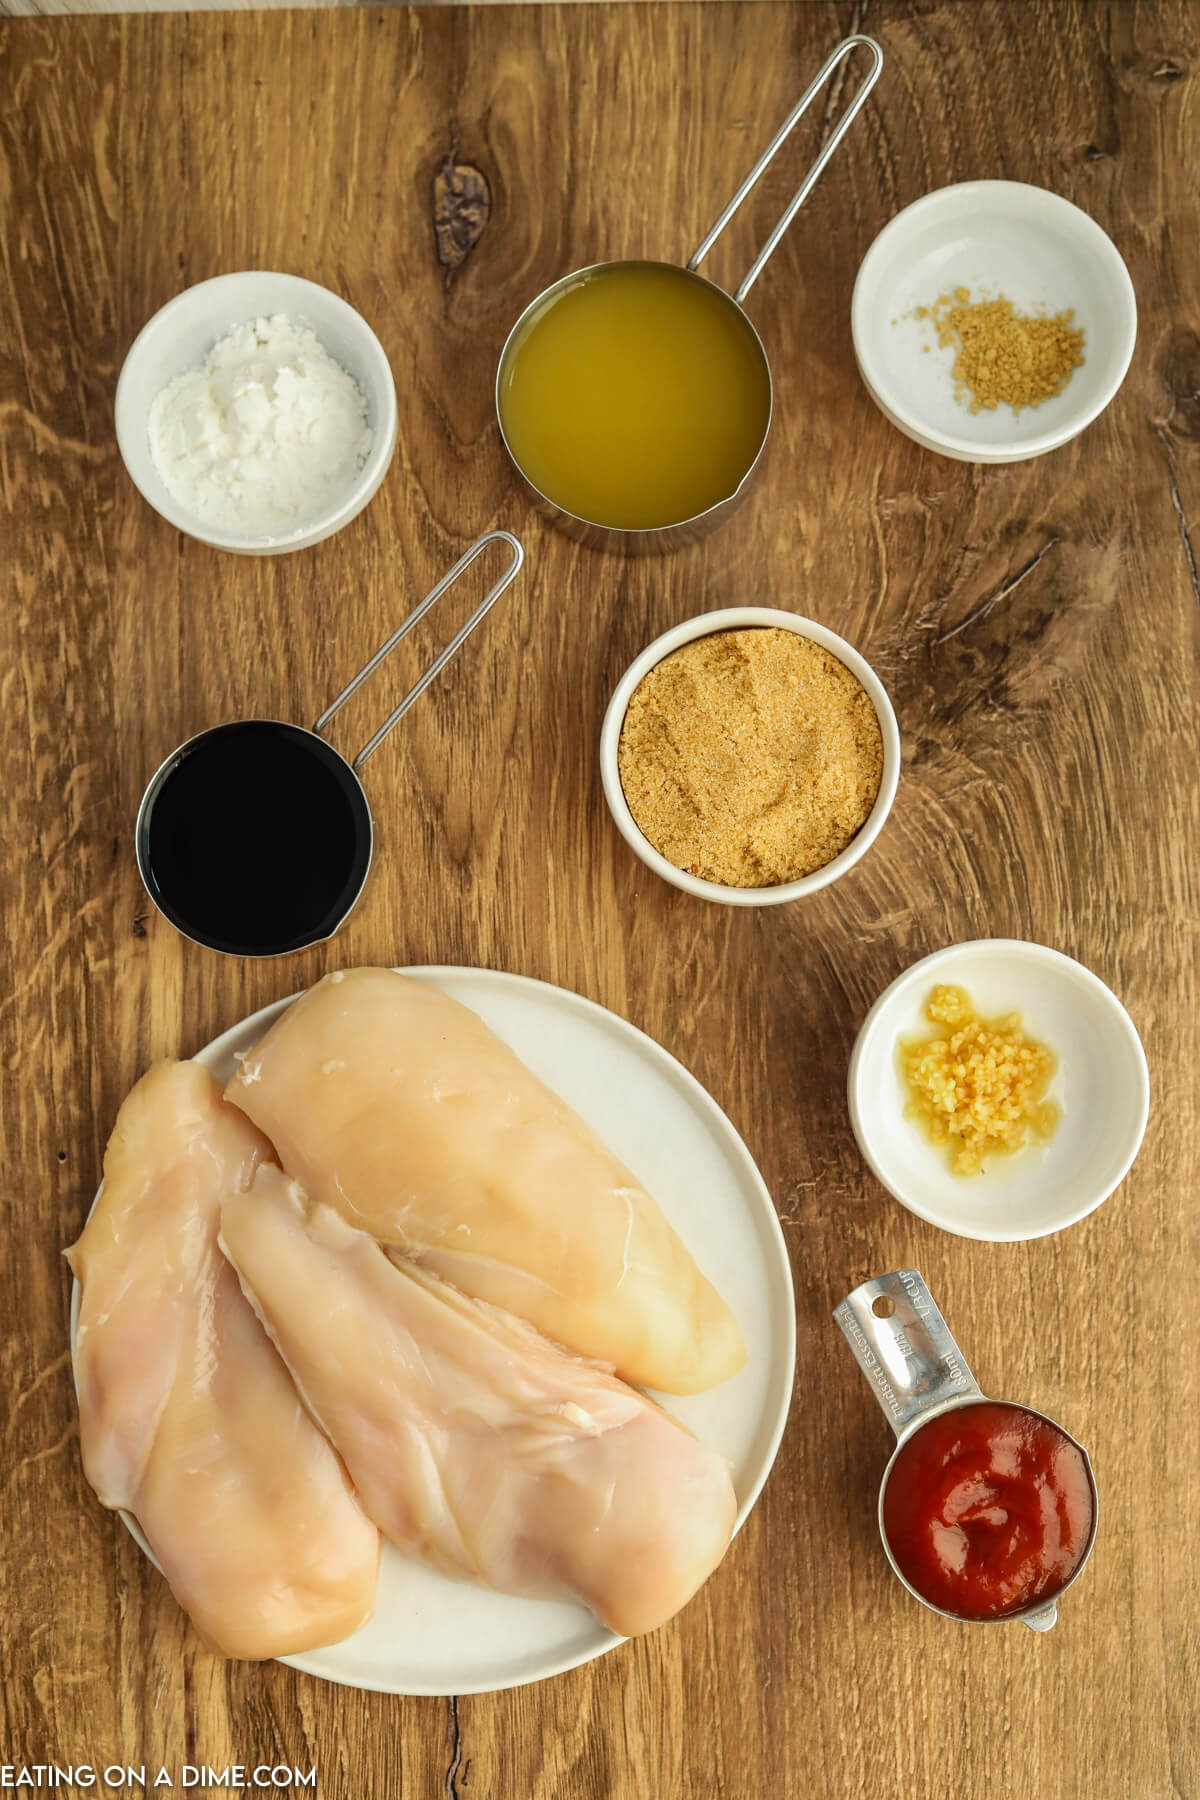 Ingredients for huli huli chicken - chicken breasts, pineapple juice, soy sauce, brown sugar, ketchup, ginger, minced garlic, cornstarch, cold water, green onions, sesame seeds